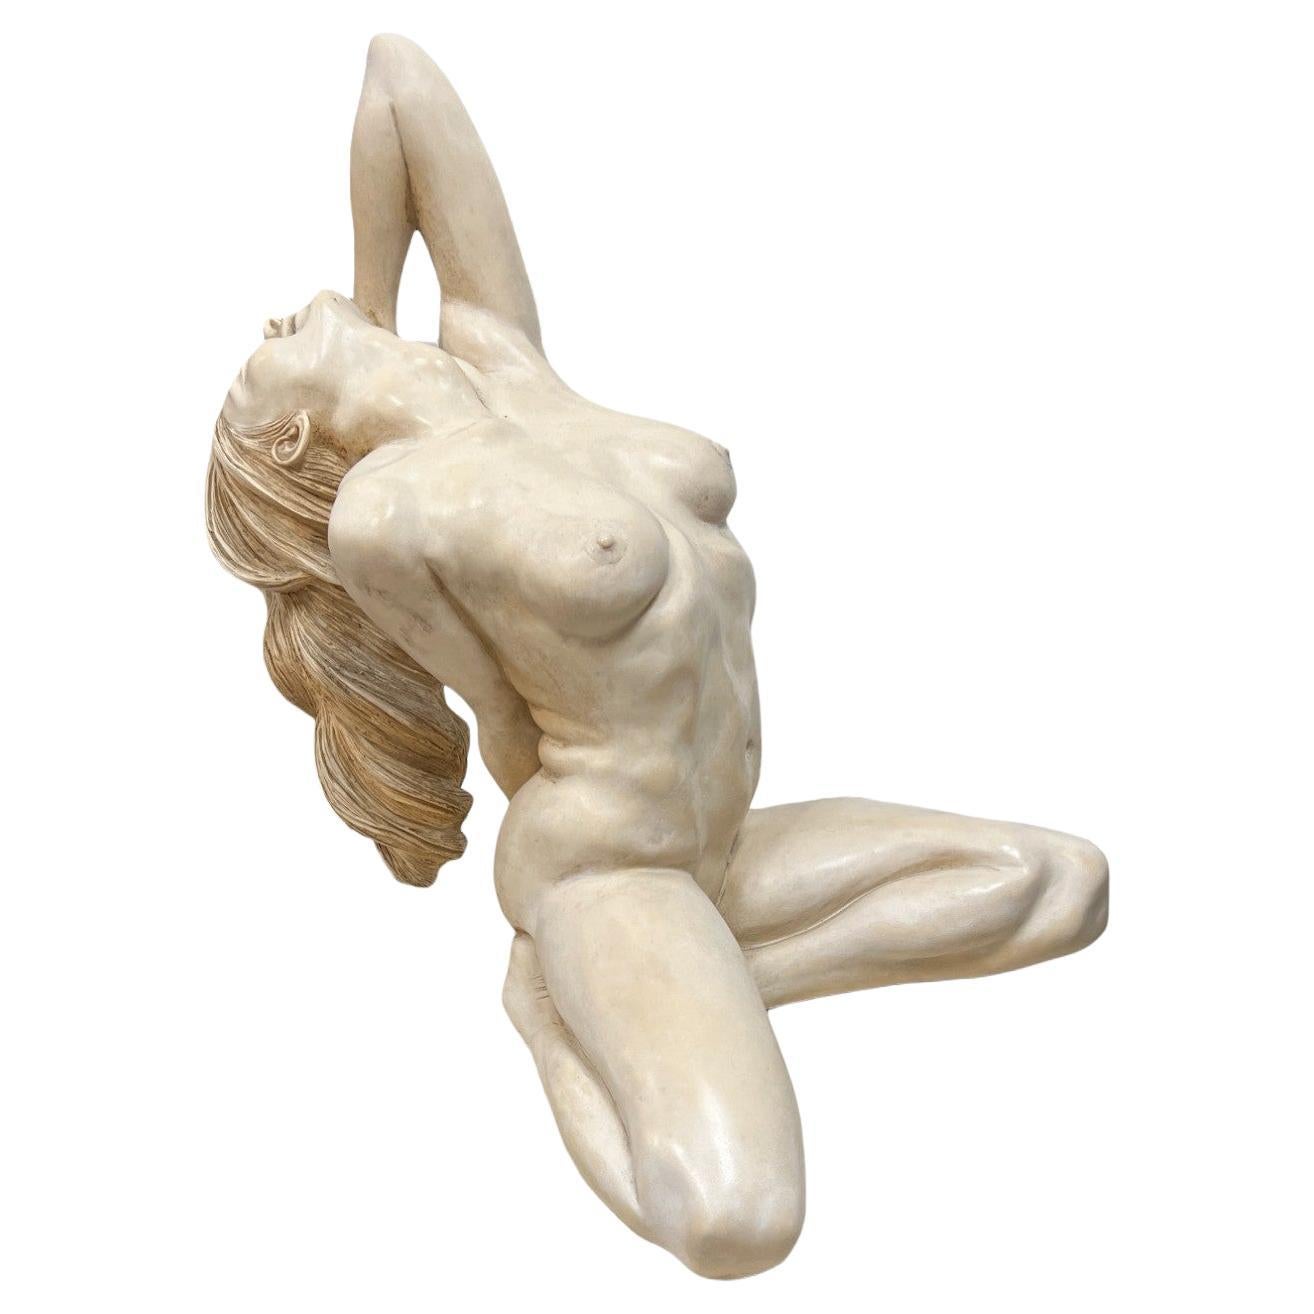 Seated Reclining Nude Female Sculpture